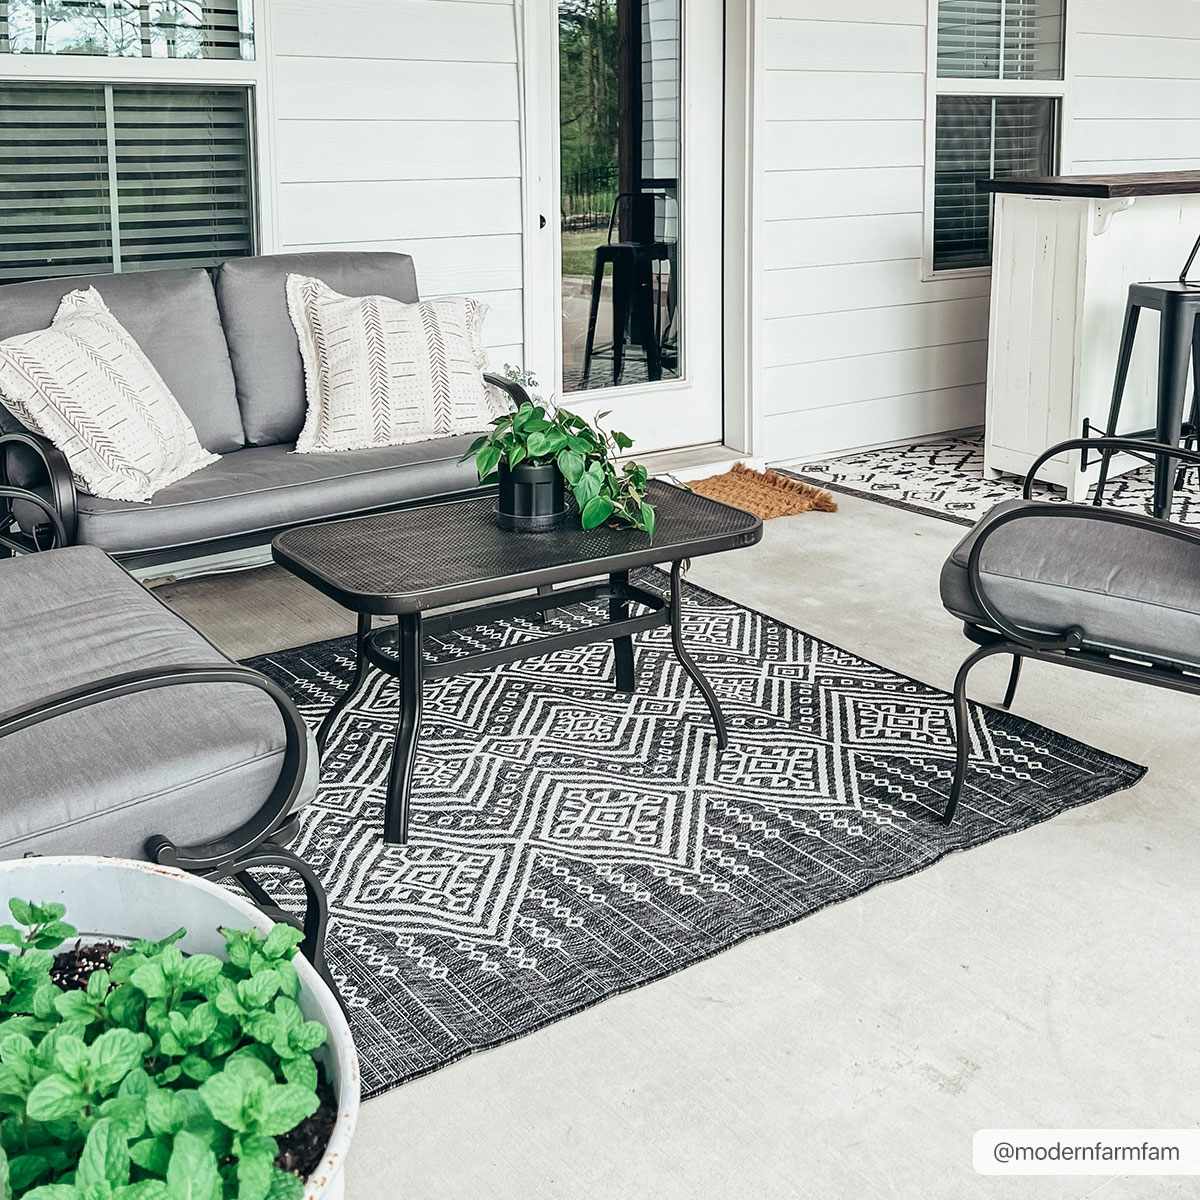 Does My Outdoor Furniture Need an Outdoor Rug? - Inspiration, by